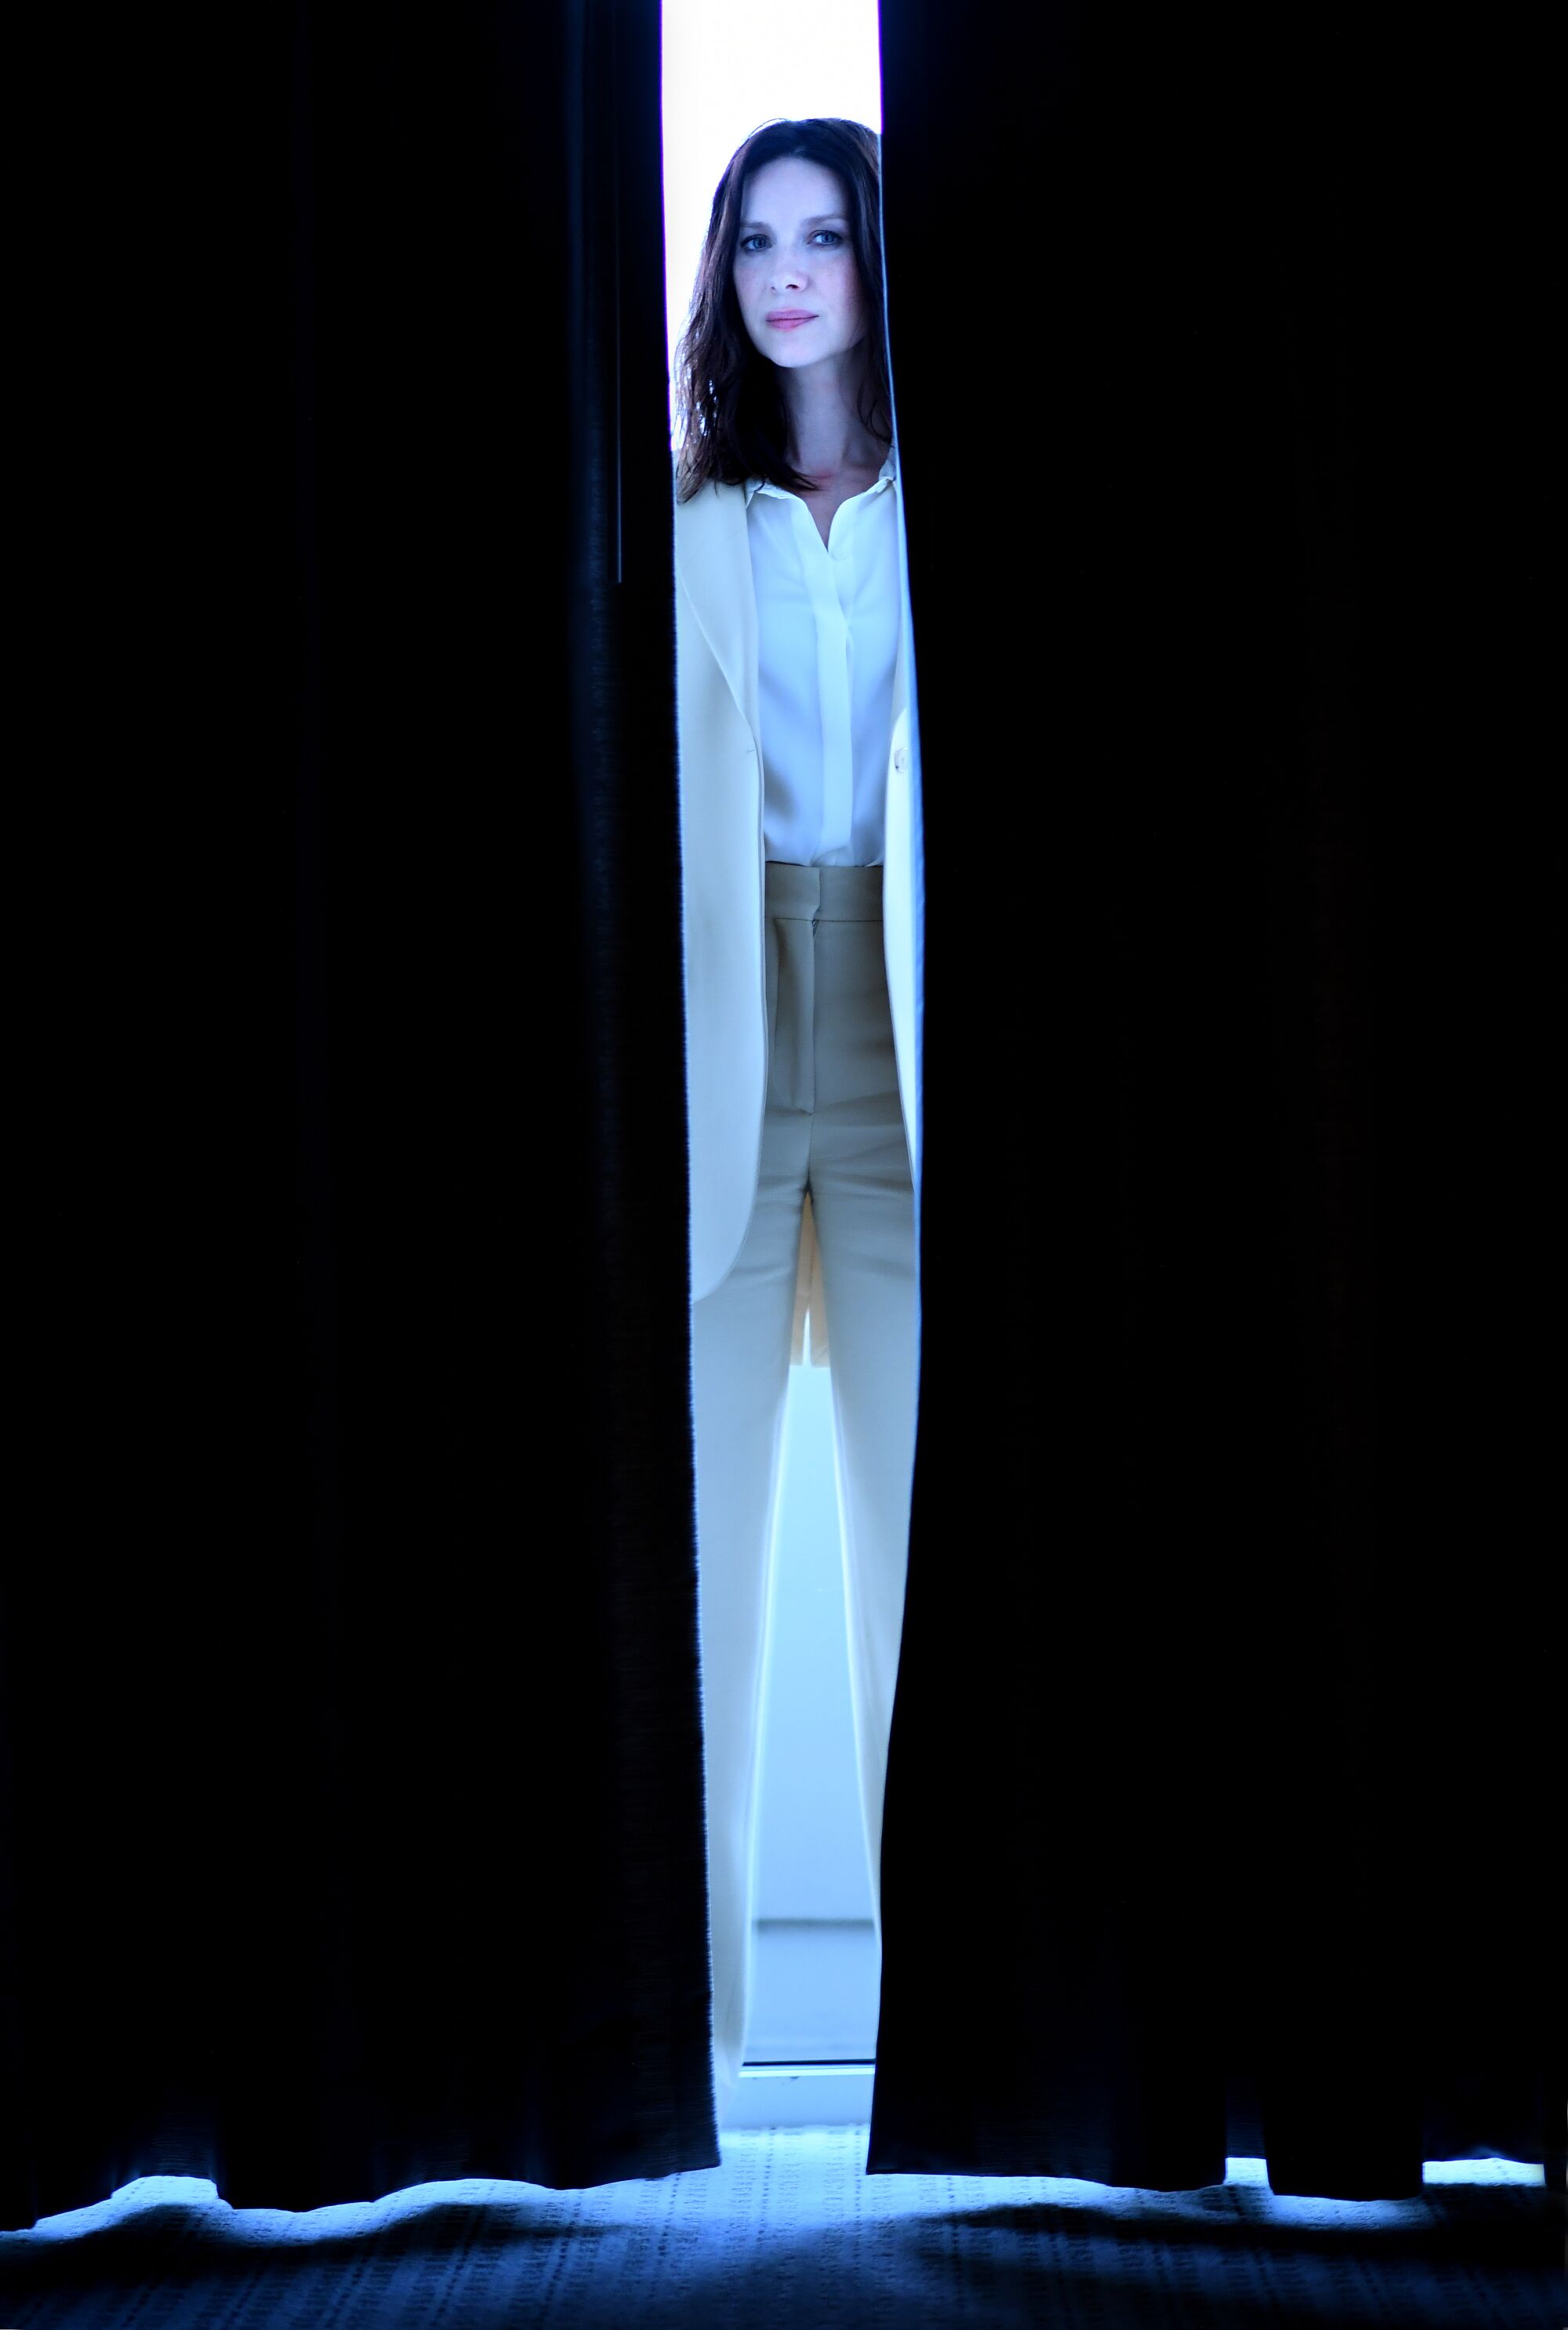 A woman stands in the gap between two dark drapes